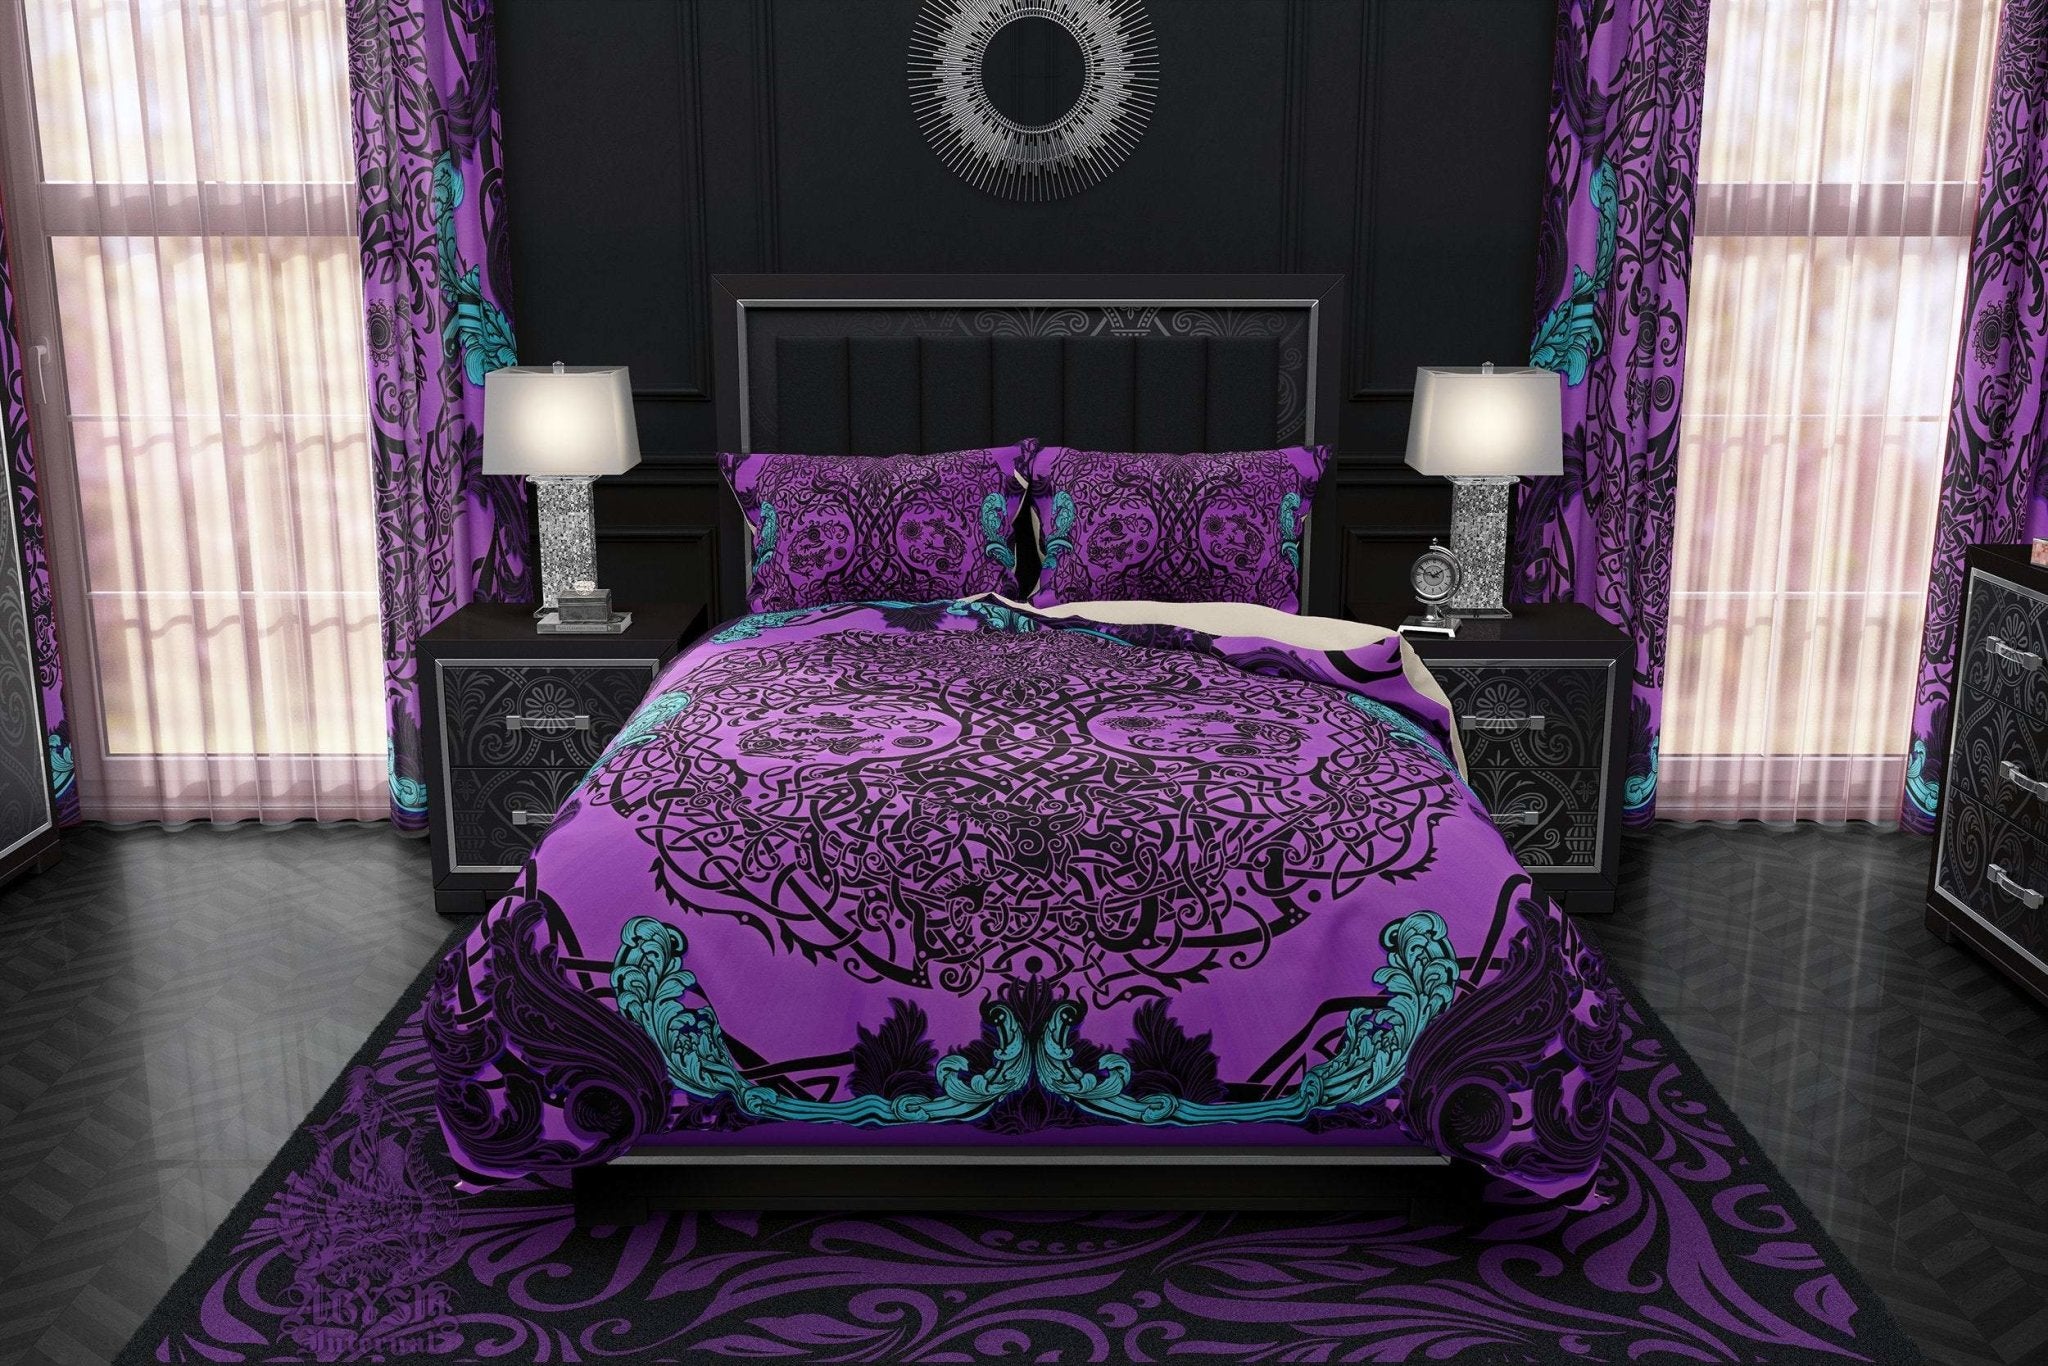 Viking Bedding Set, Comforter and Duvet, Yggdrasil, Norse Art, Pastel Goth Bed Cover and Bedroom Decor, King, Queen and Twin Size - Purple - Abysm Internal